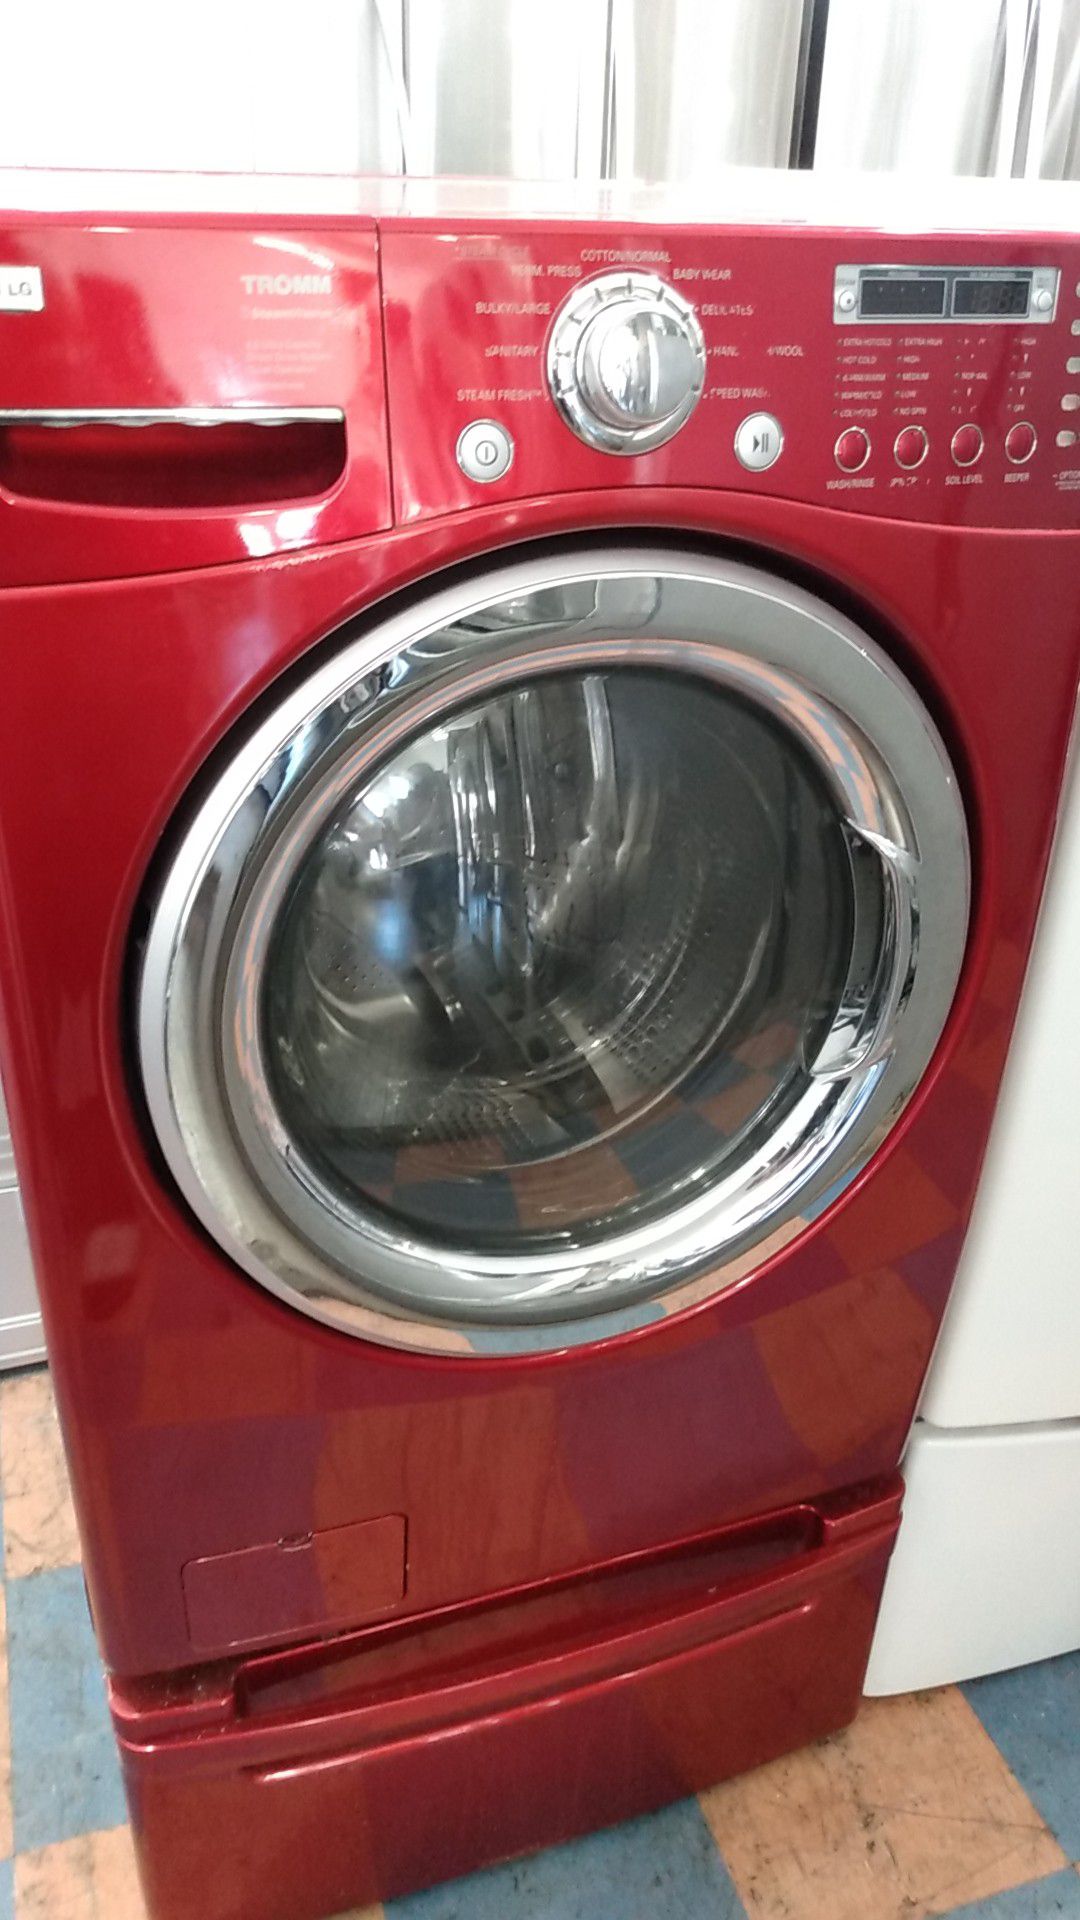 LG WASHER AND GAS DRYER FRONT LOAD WITH PEDESTRIAN